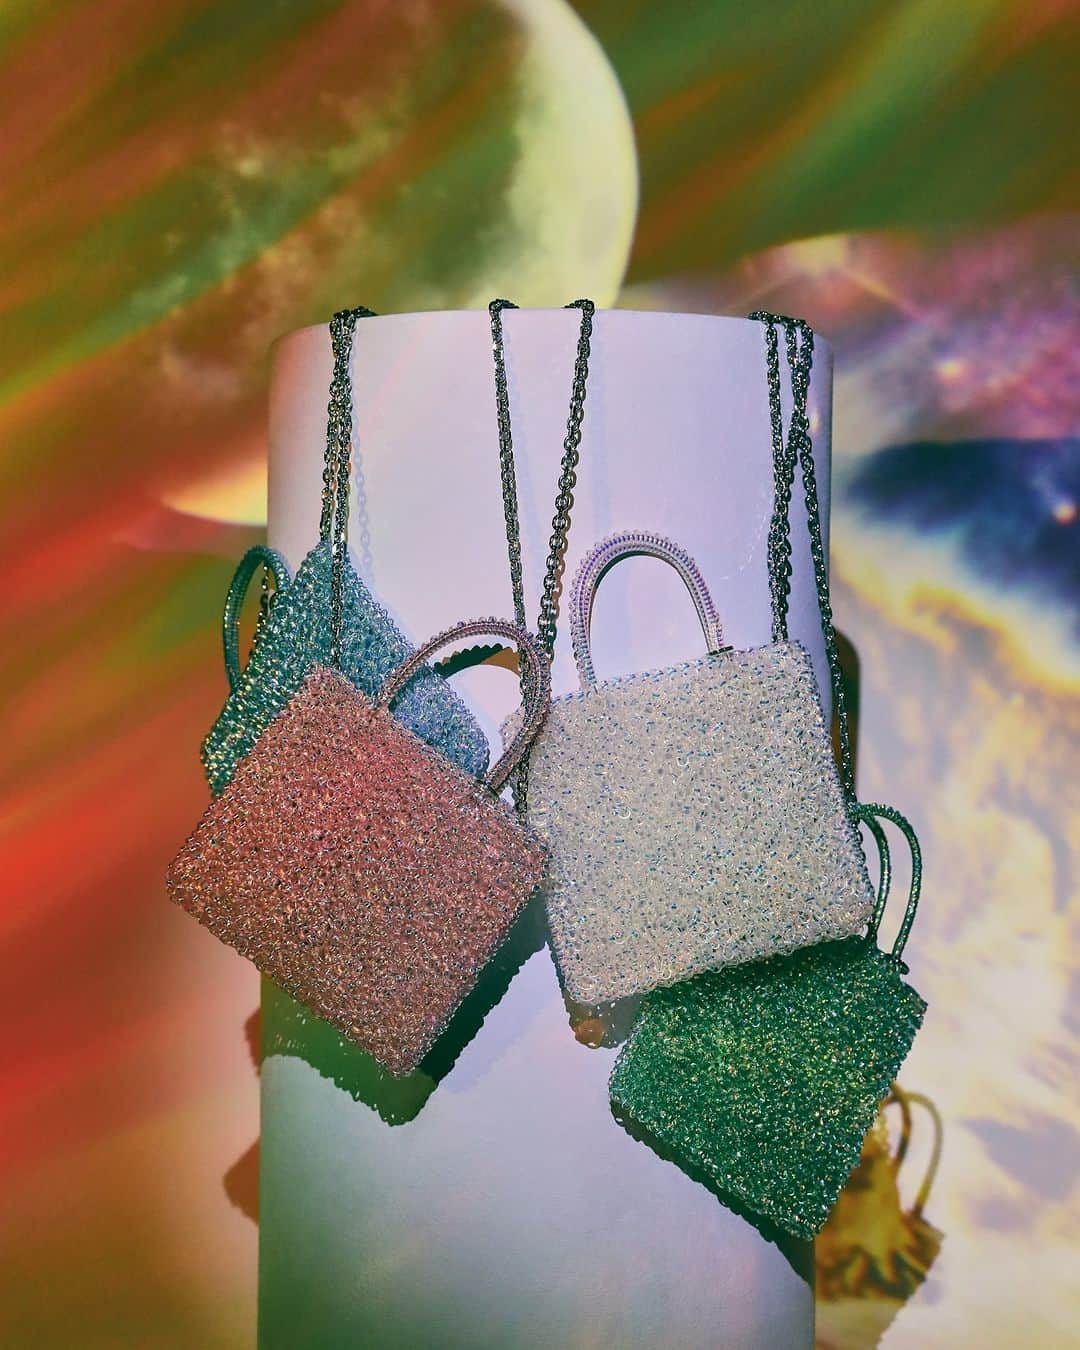 ANTEPRIMAのインスタグラム：「Stella Dazzled.  From the purest Stella Perla to the vivid Stella Verde, #ANTEPRIMA Stella #WIREBAGs are the delicate women waiting for her Mr. Right of lifetime. As of adding a dreamy lens to the #WIREBAG, grab it with you for an appealing encounter.   Shop the WIREBAG in Stella hues now.  #STELLA #SpringSummer2023 #SS23 #ANTEPRIMA #WIREBAG #SummerBag #BeachBag #PoolBag #WaterResistenceBag #Miniature #MicroBag #MiniBag #CraftBag #CrochetBag #Handcraft #KnitBag #WorkBag #ItalianDesign #Craftmanship #アンテプリマ #Tanabata #七夕 #彦星 #織姫 #牛郎 #織女」